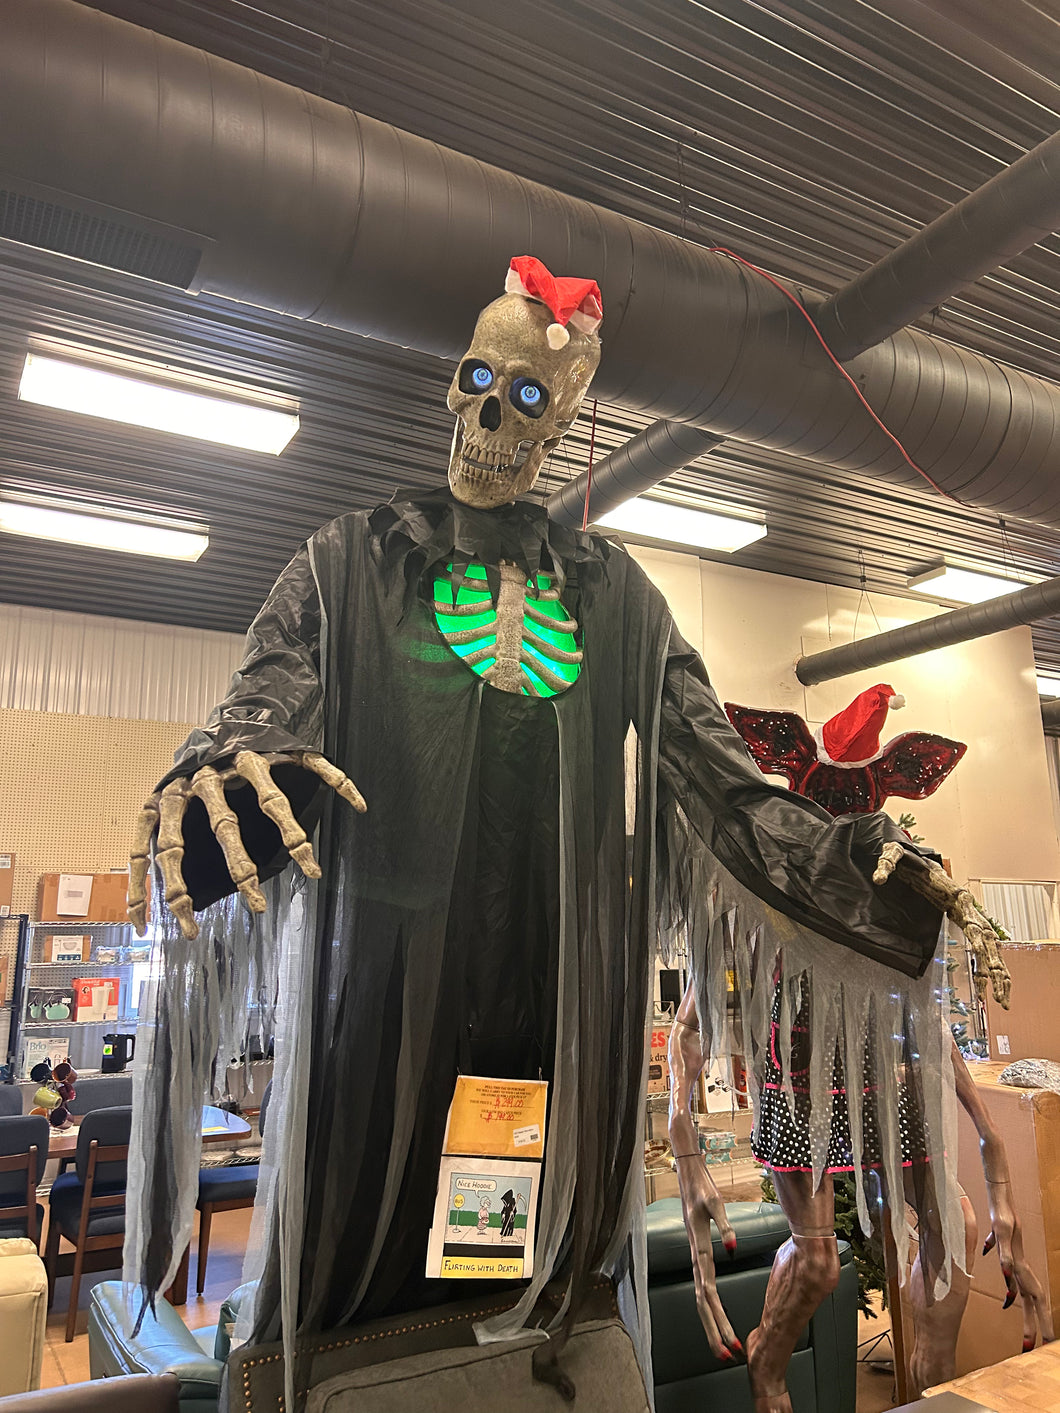 Seasonal Visions 10 ft. Towering Reaper Grim Animated Halloween (CHRISTMAS) Decoration!

-New & ASSEMBLED (Have a box)